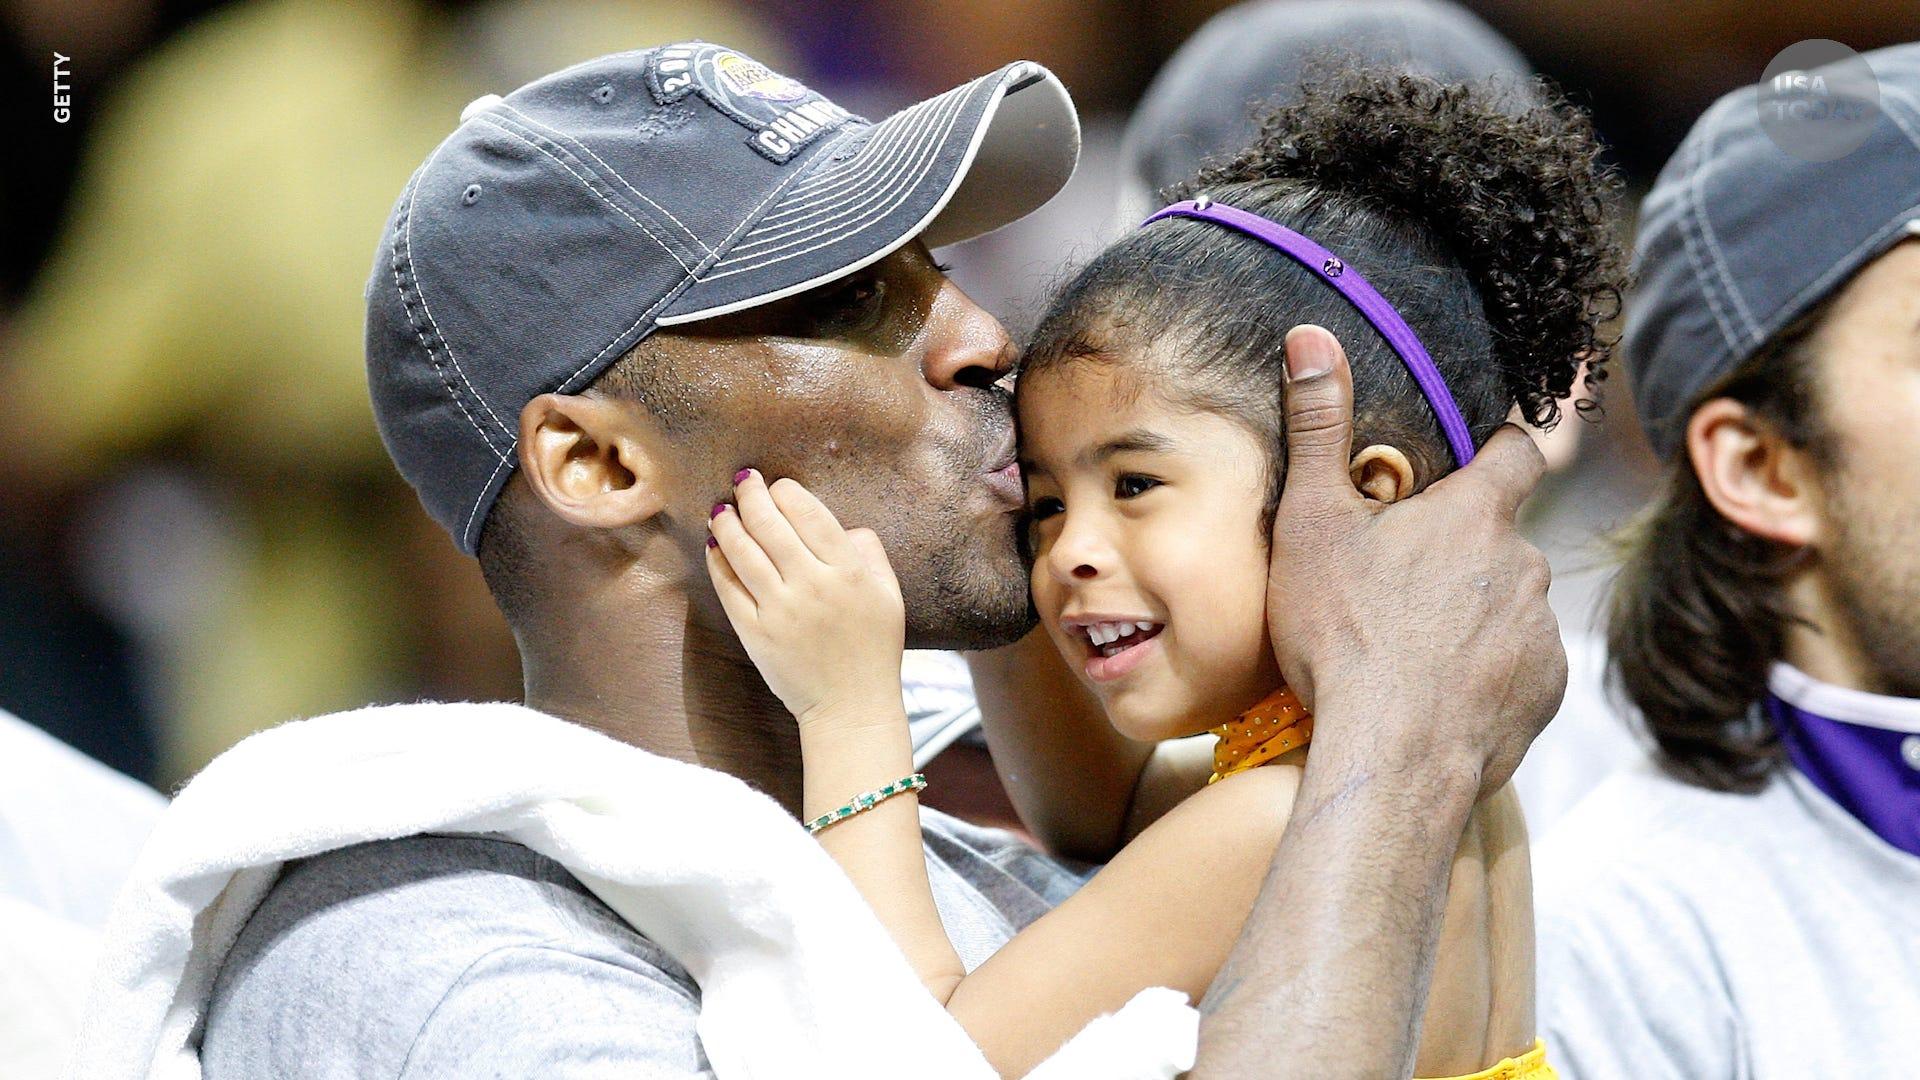 Kobe Bryant's daughter planned to carry on basketball legacy